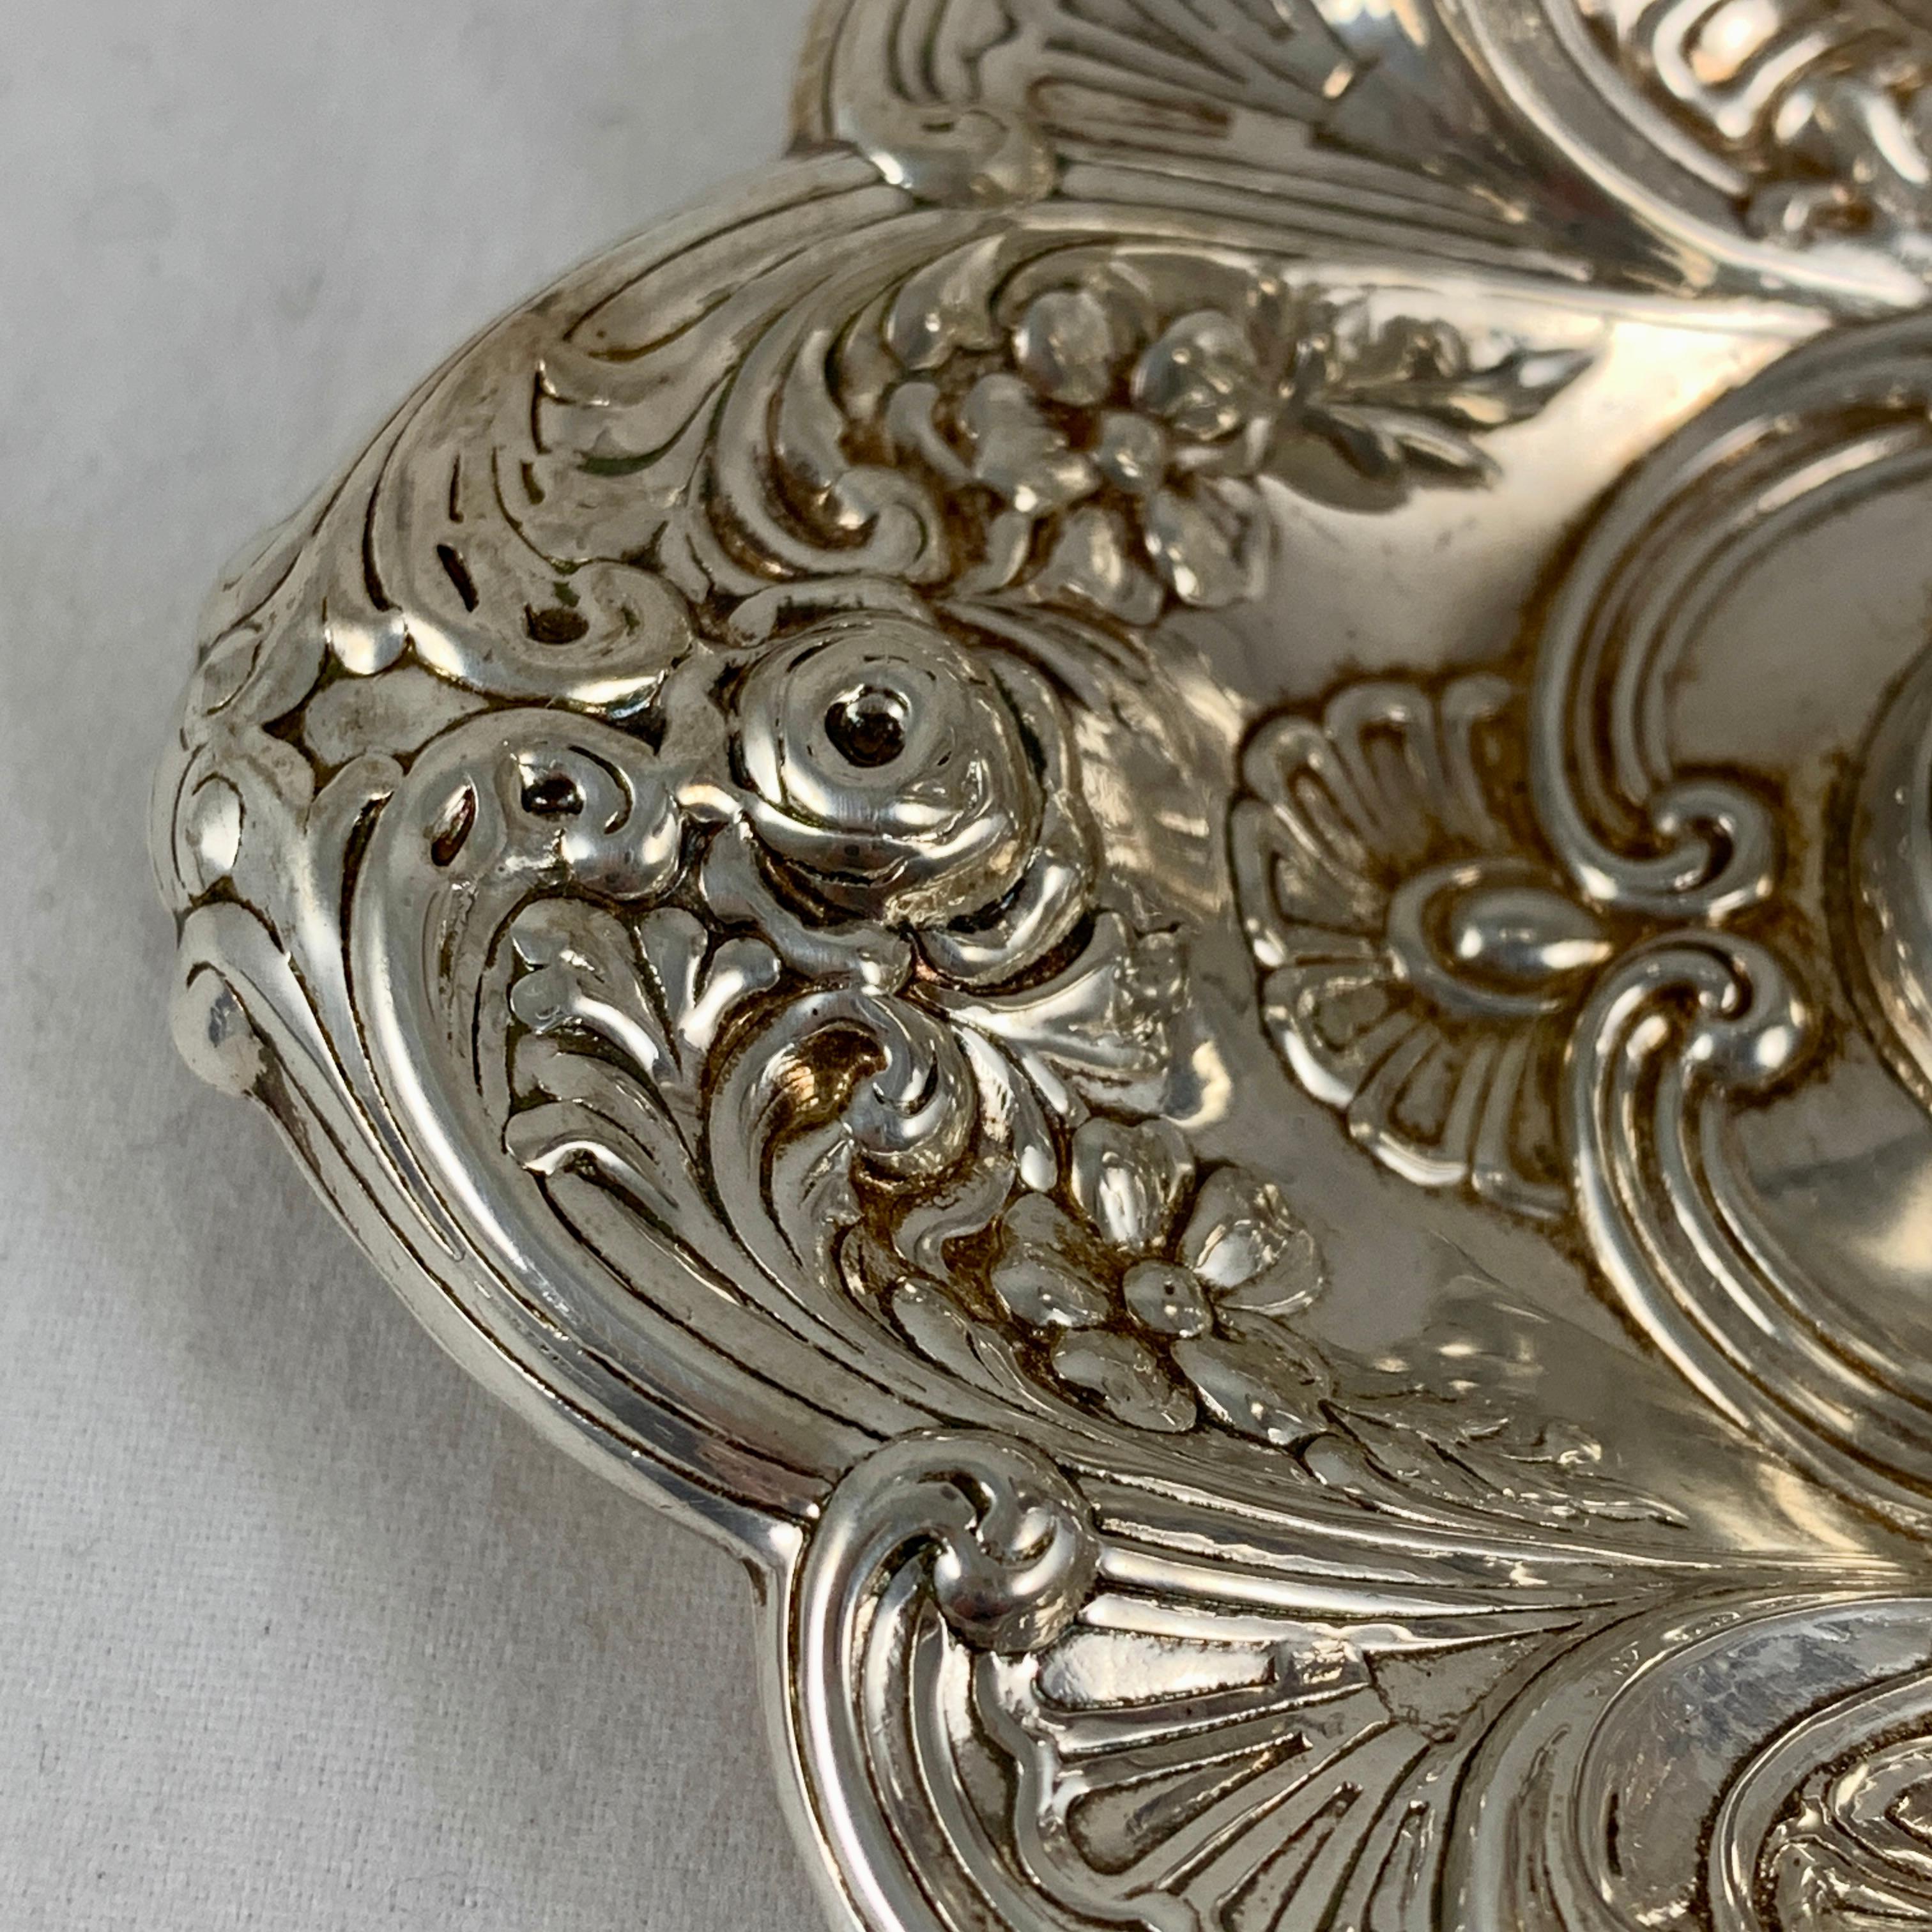 Gorham Sterling Silver Floral Repoussé Chambersticks, circa 1920-1930, a Pair For Sale 3